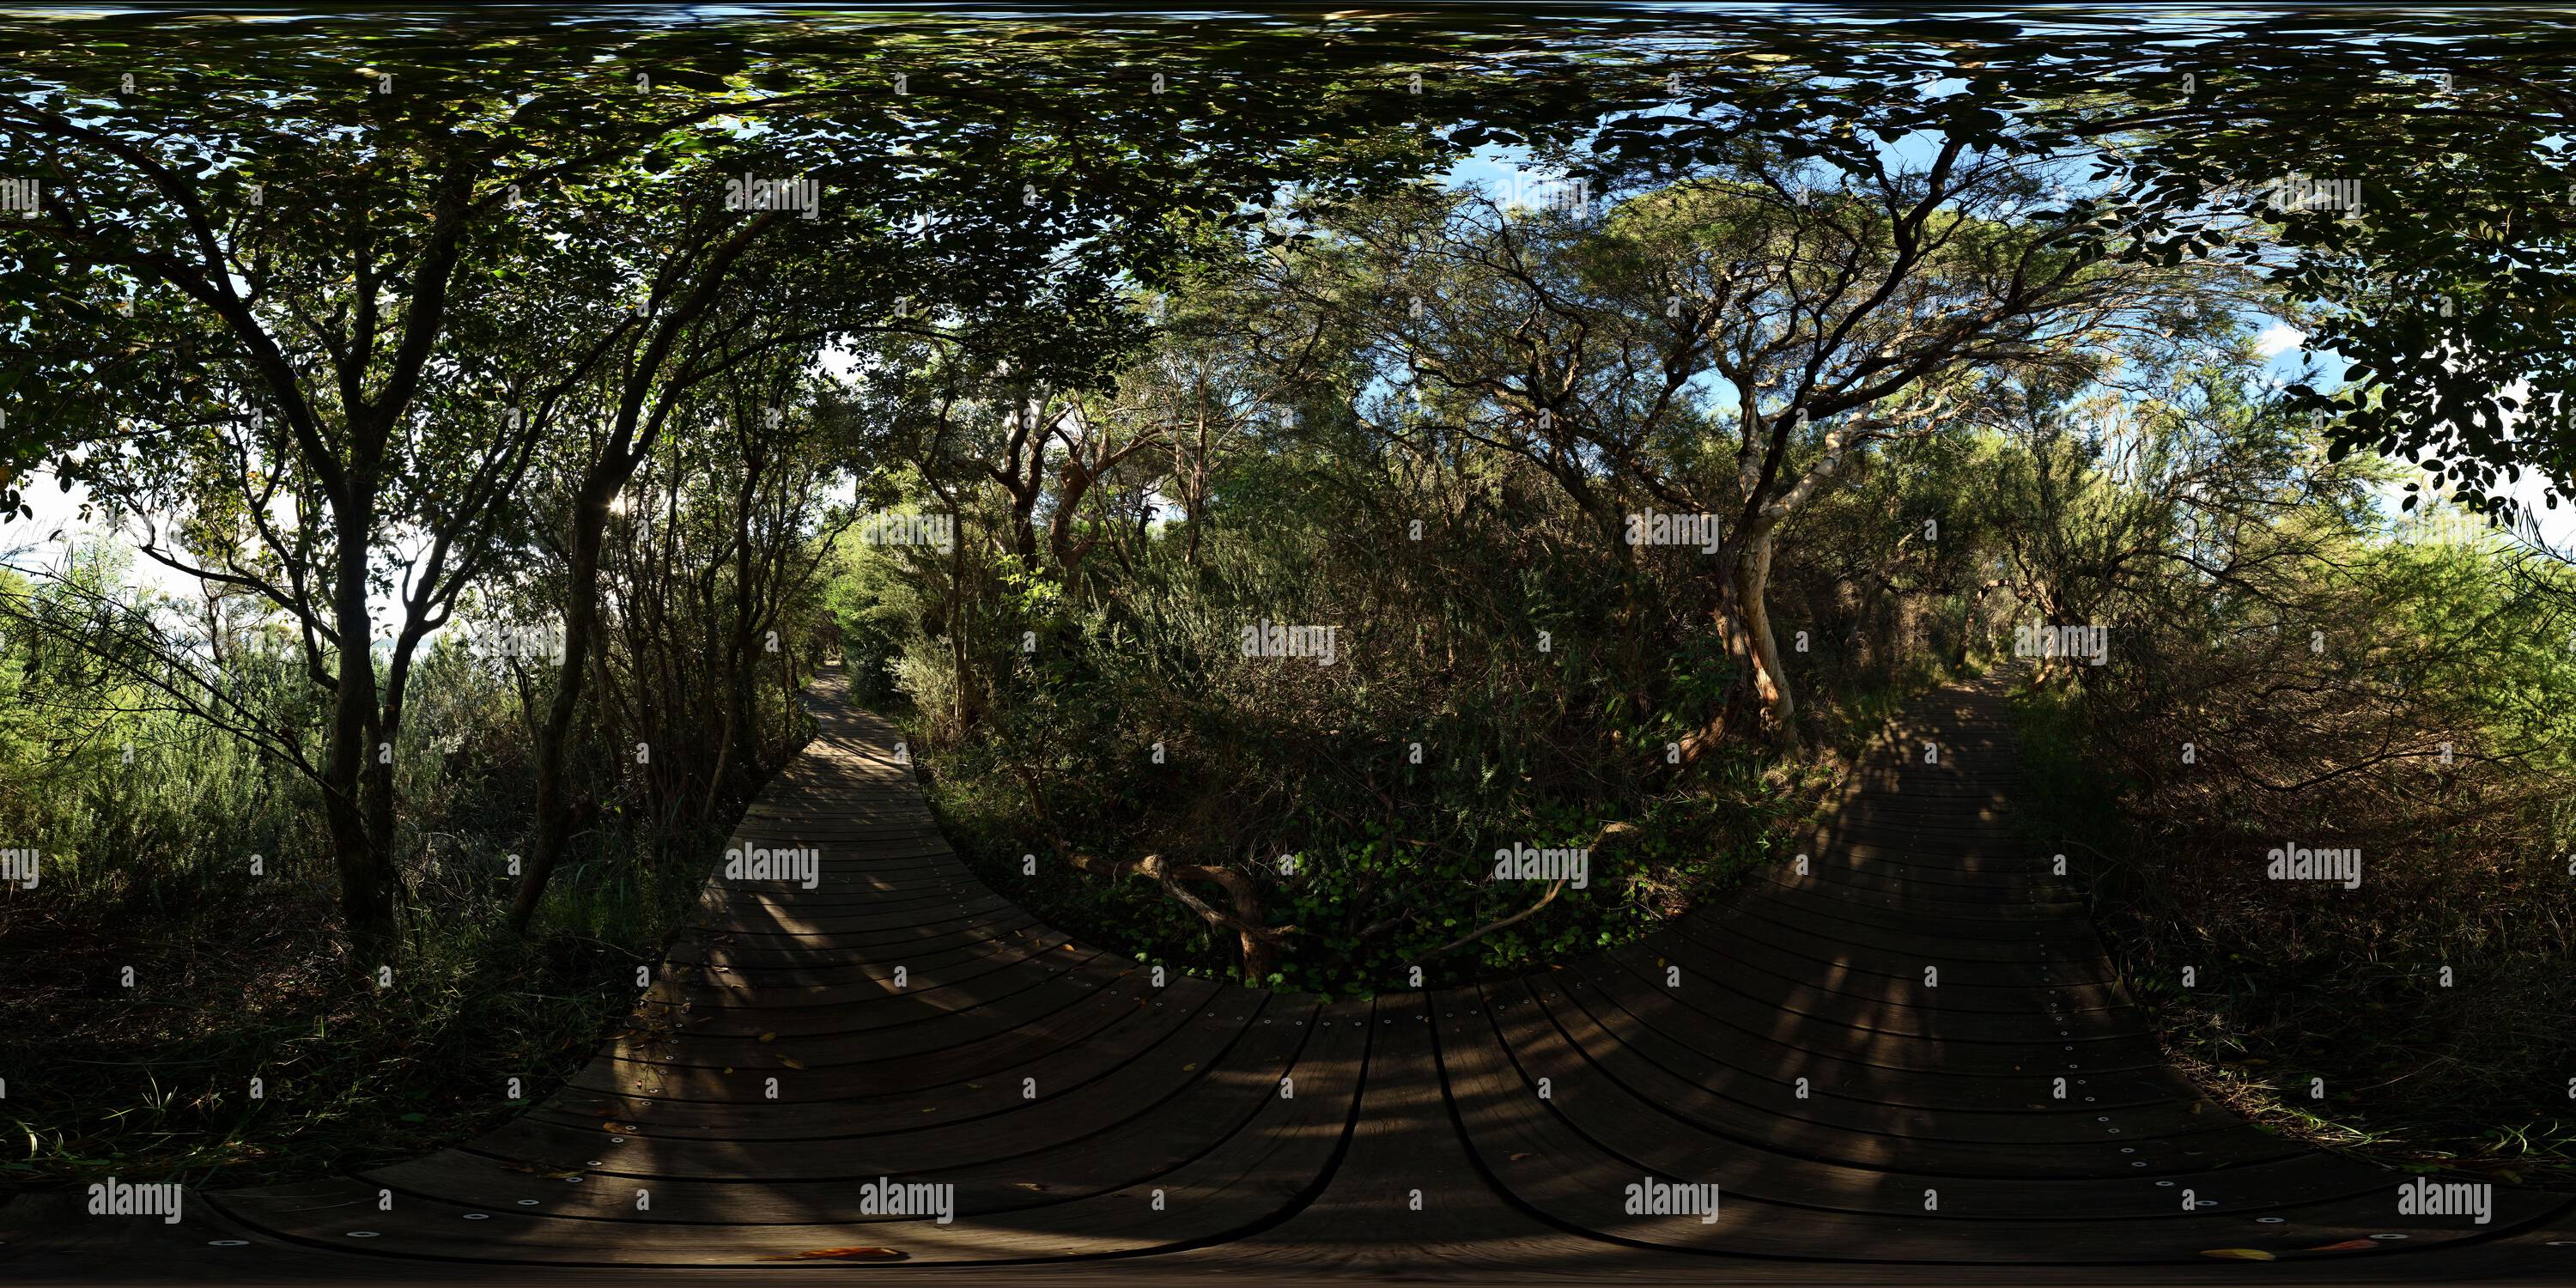 360 degree panoramic view of A Melaleuca Tree Tunnel 360° Panorama - Hermitage Foreshore Track, Vaucluse, Sydney Australia